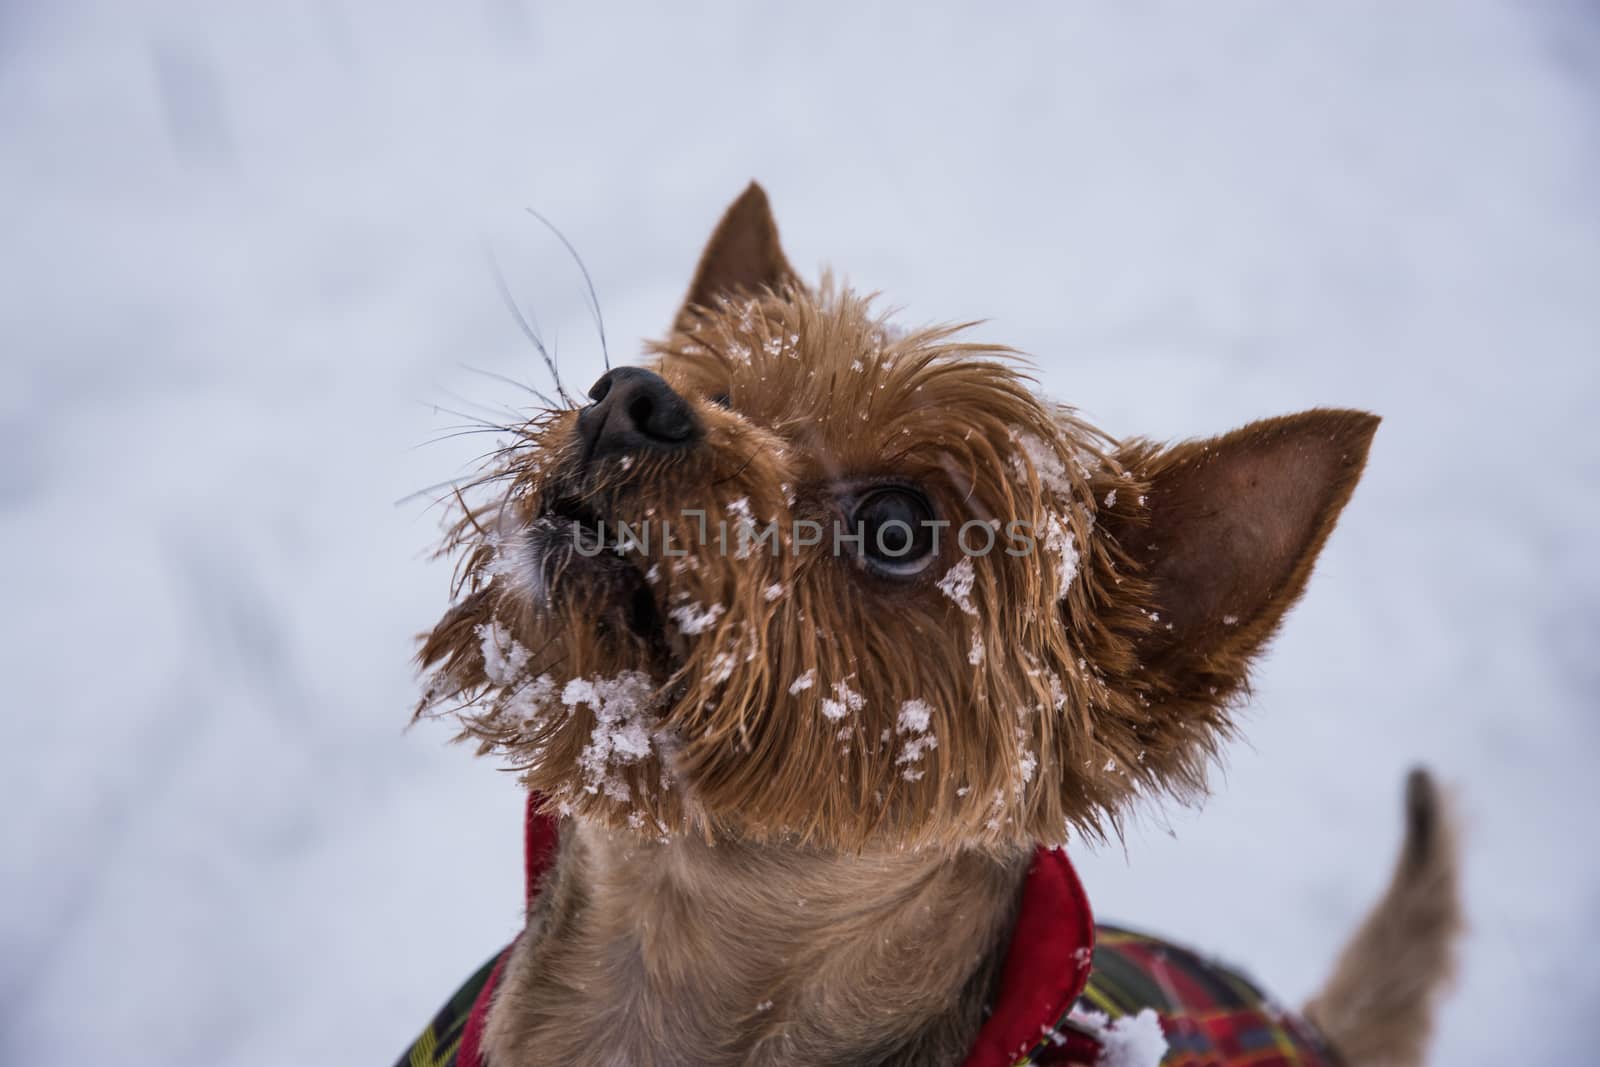 Cute dog playing in the snow with flakes